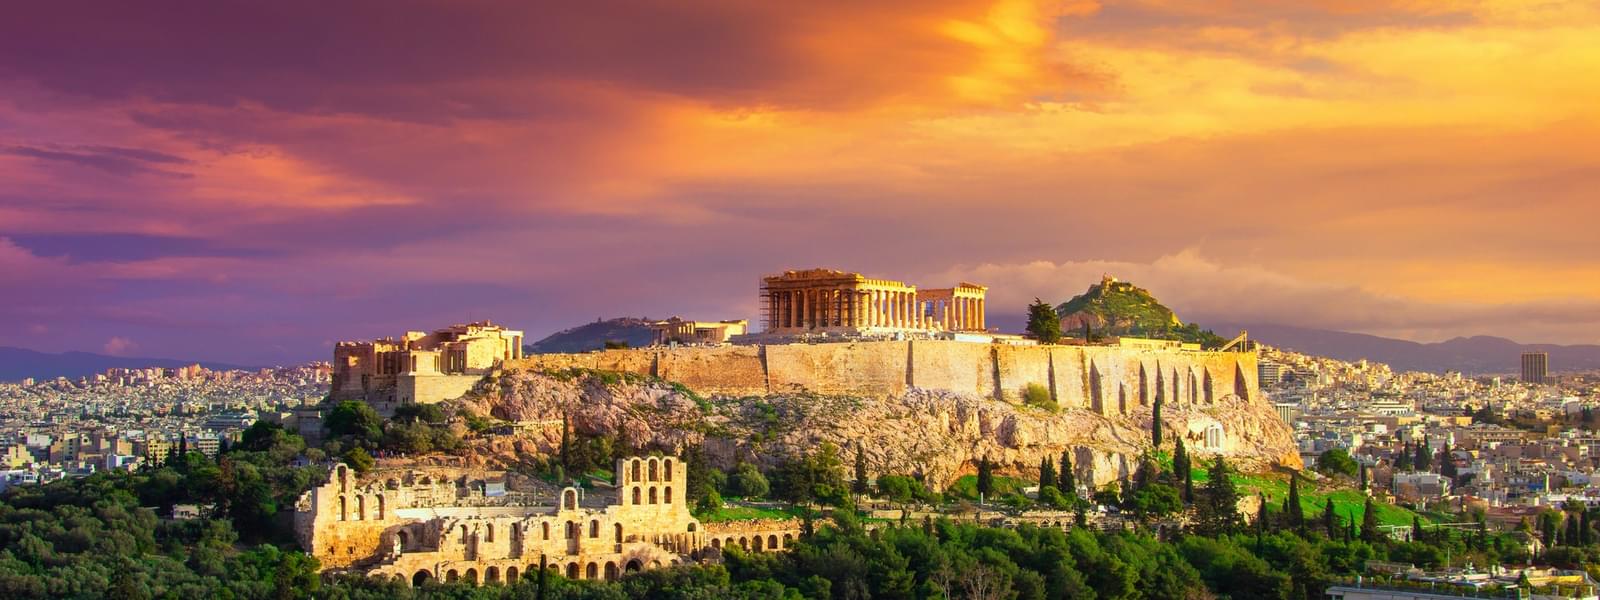 8 Days Jewels of Greece Tour Image